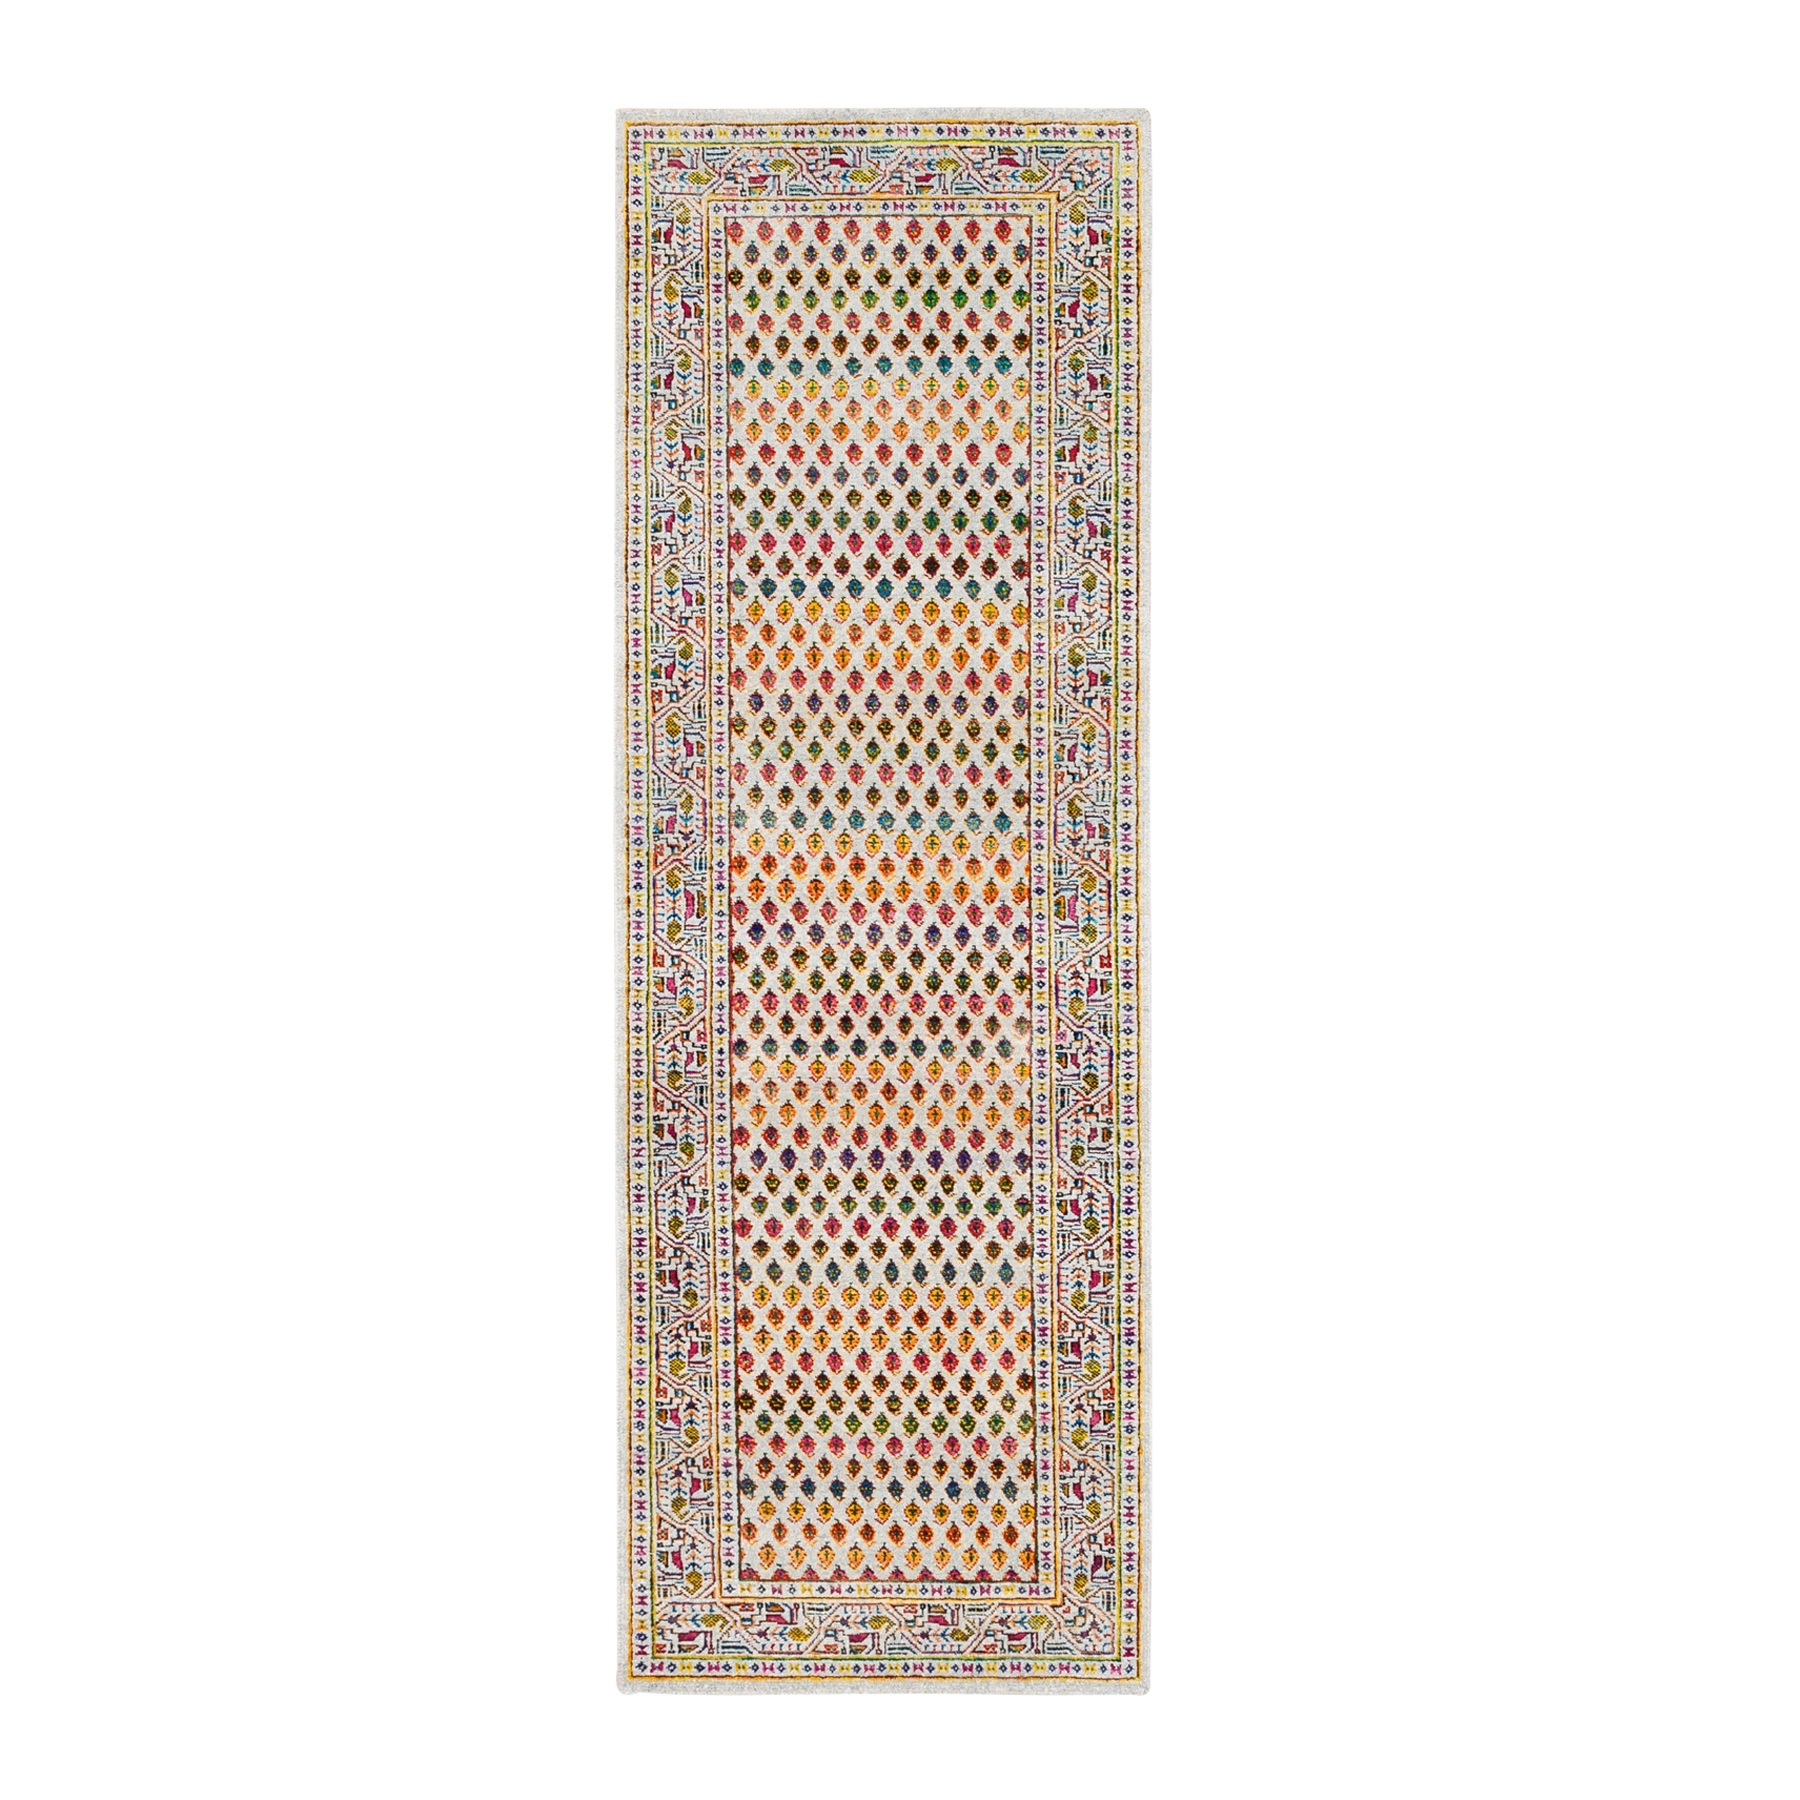 2'6"x8' Colorful Wool And Sari Silk Sarouk Mir Inspired With Small Boteh Design Hand Woven Oriental Runner Rug 